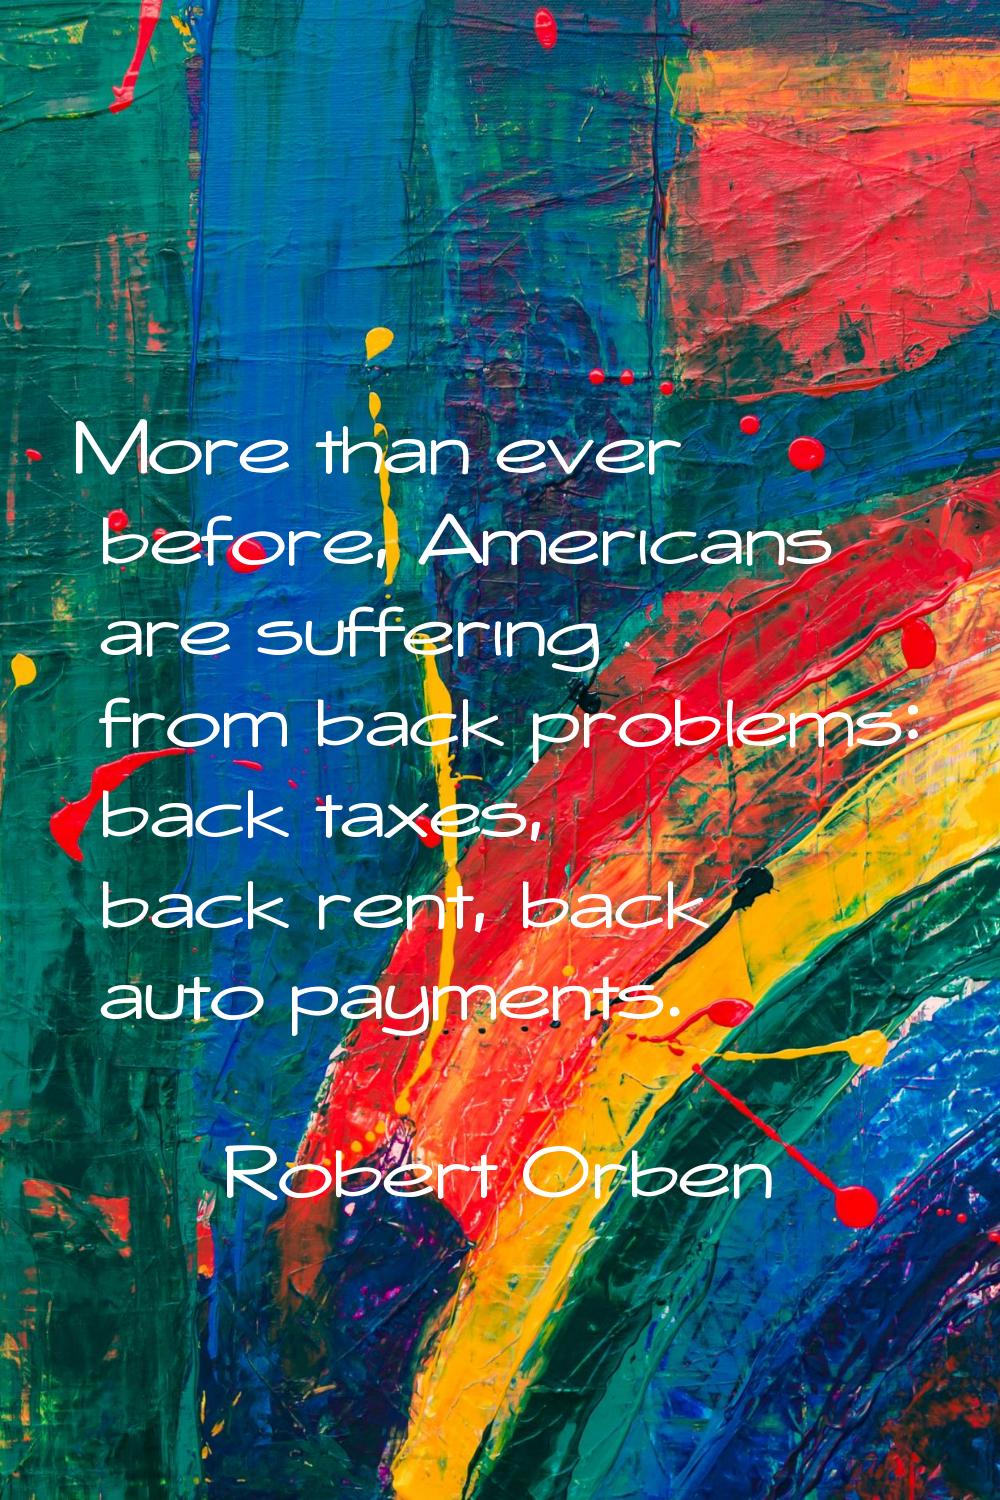 More than ever before, Americans are suffering from back problems: back taxes, back rent, back auto